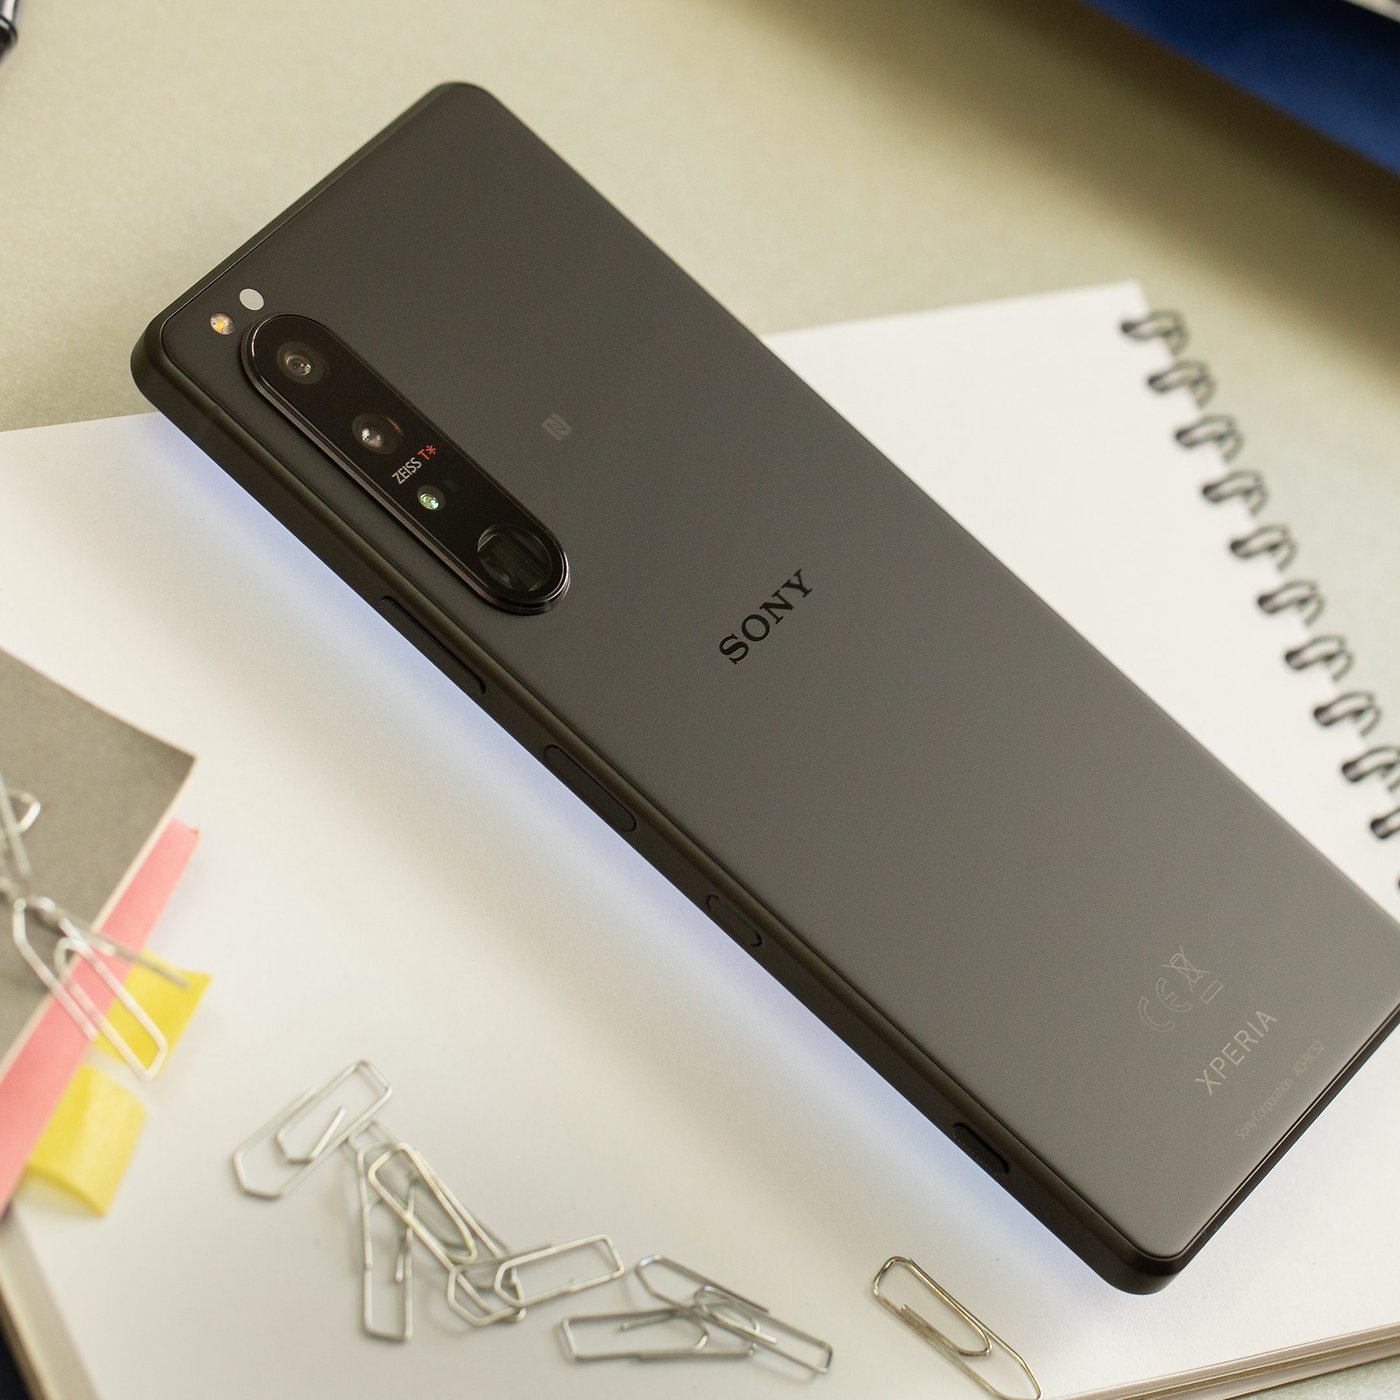 Sony Xperia 1 III review: The final enthusiast smartphone | NextPit